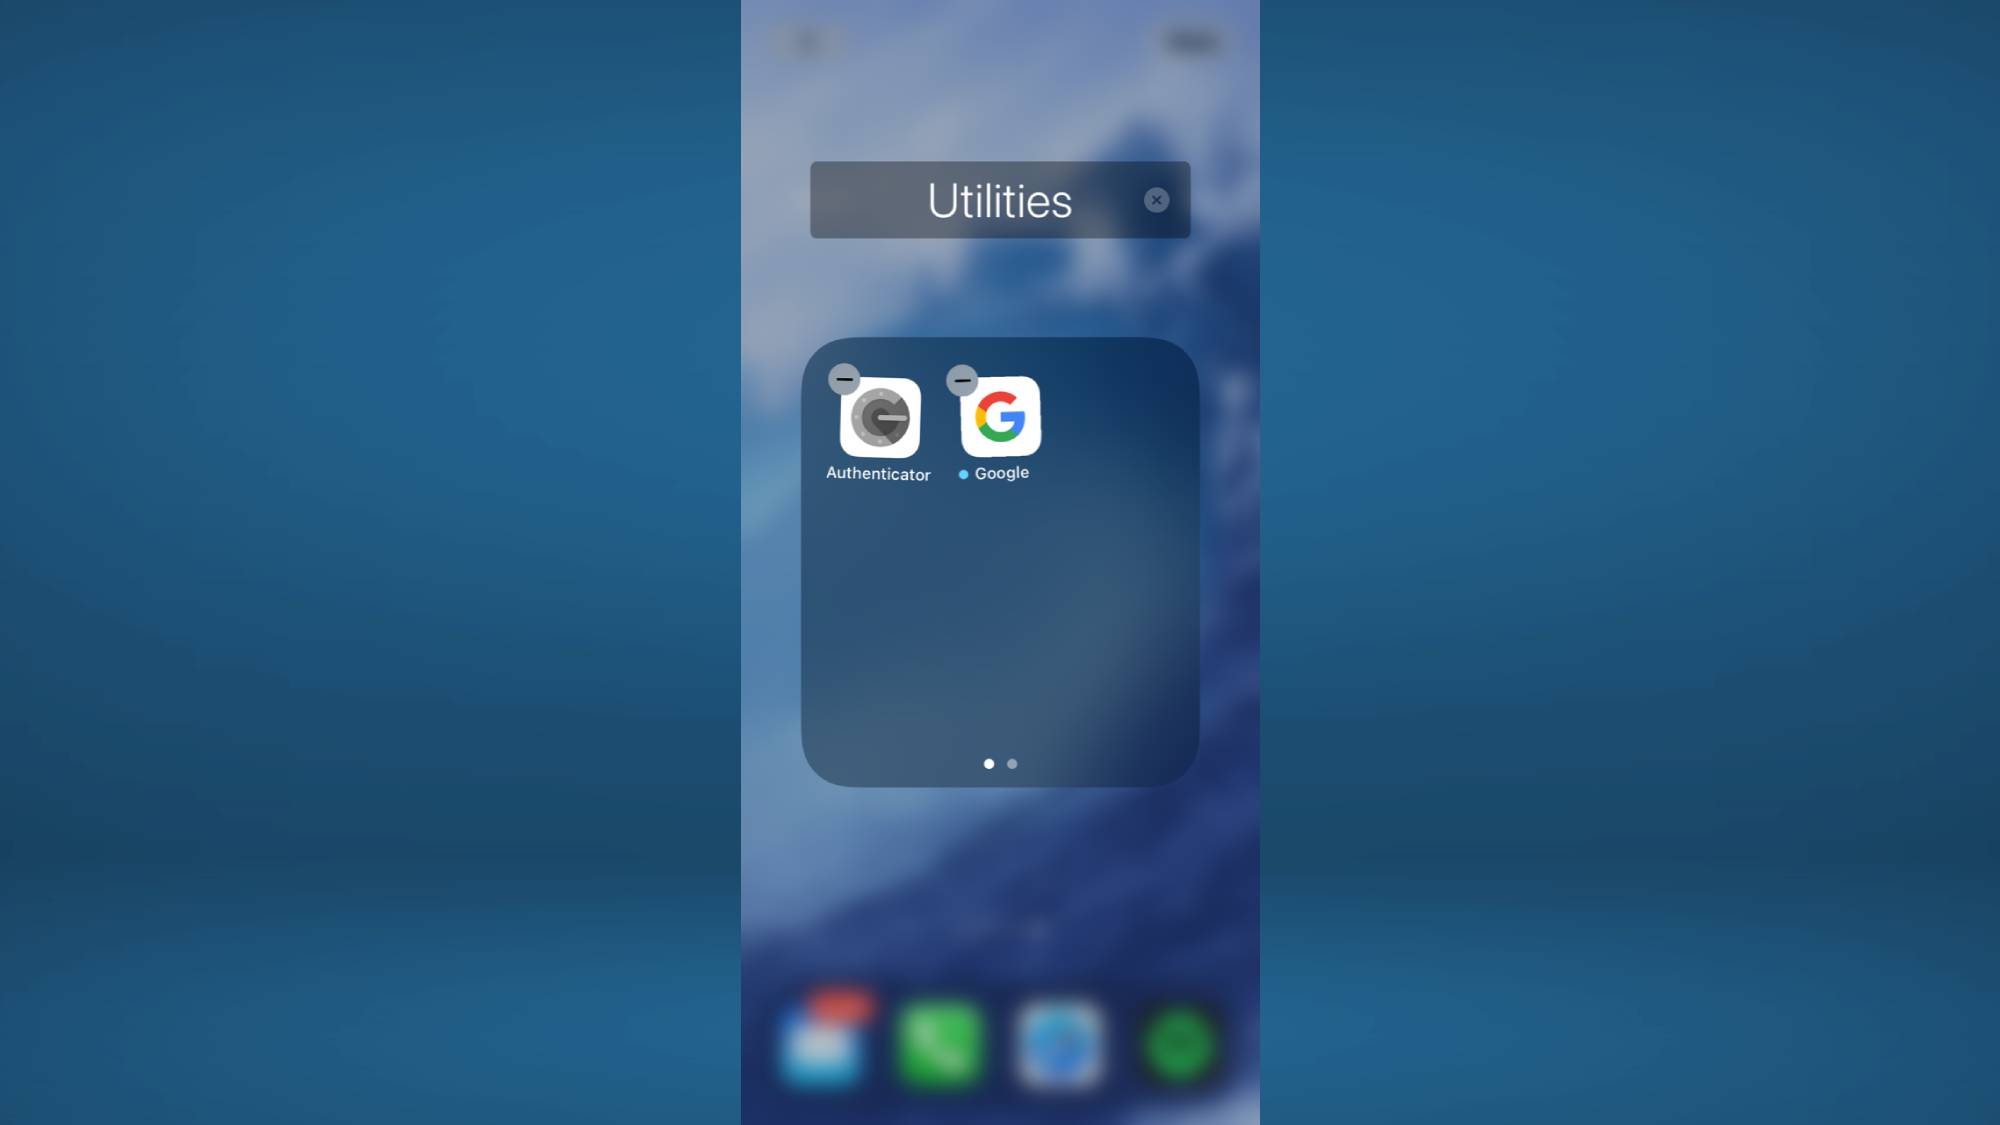 How to hide apps on iPhone - add screens